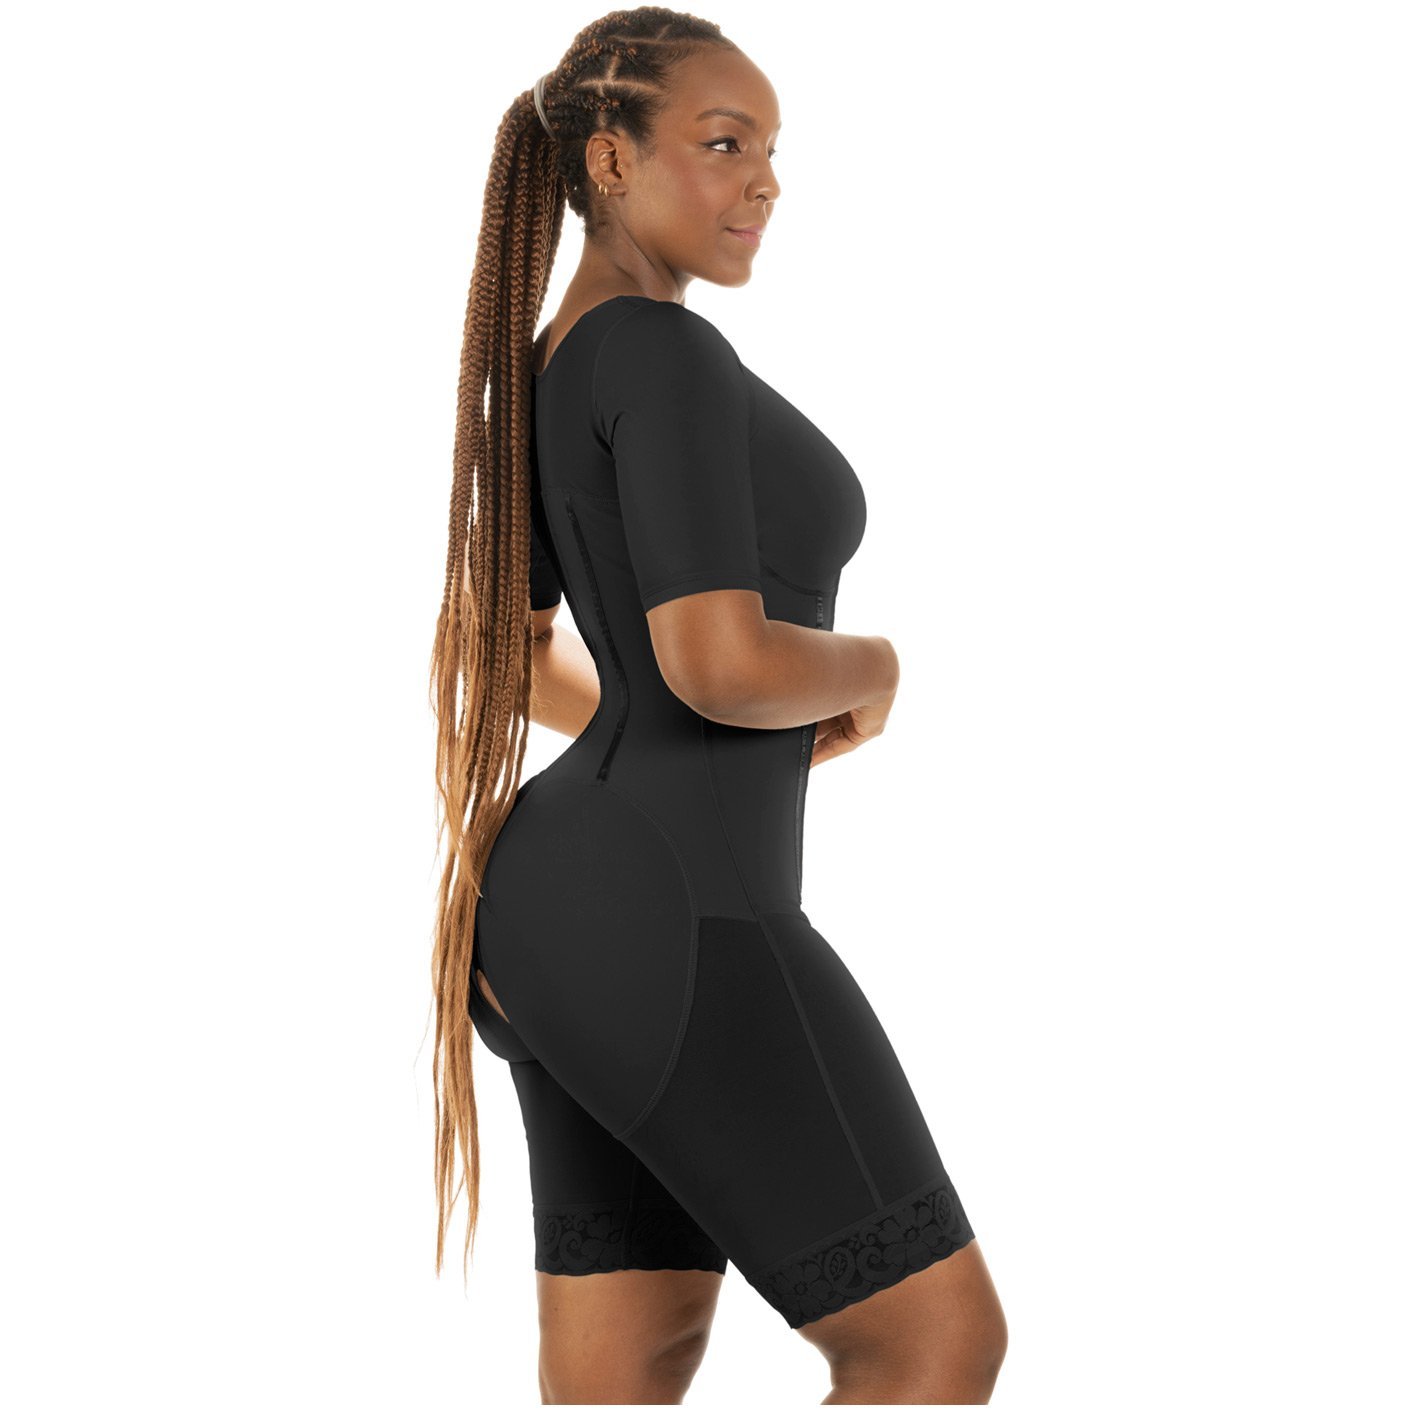 https://www.myfajascolombianas.com/cdn/shop/products/bling-shapers-938bf-colombian-compression-garment-for-women-post-surgery-use-with-sleeves-and-built-in-bra-431872_1024x1024@2x.jpg?v=1654384086